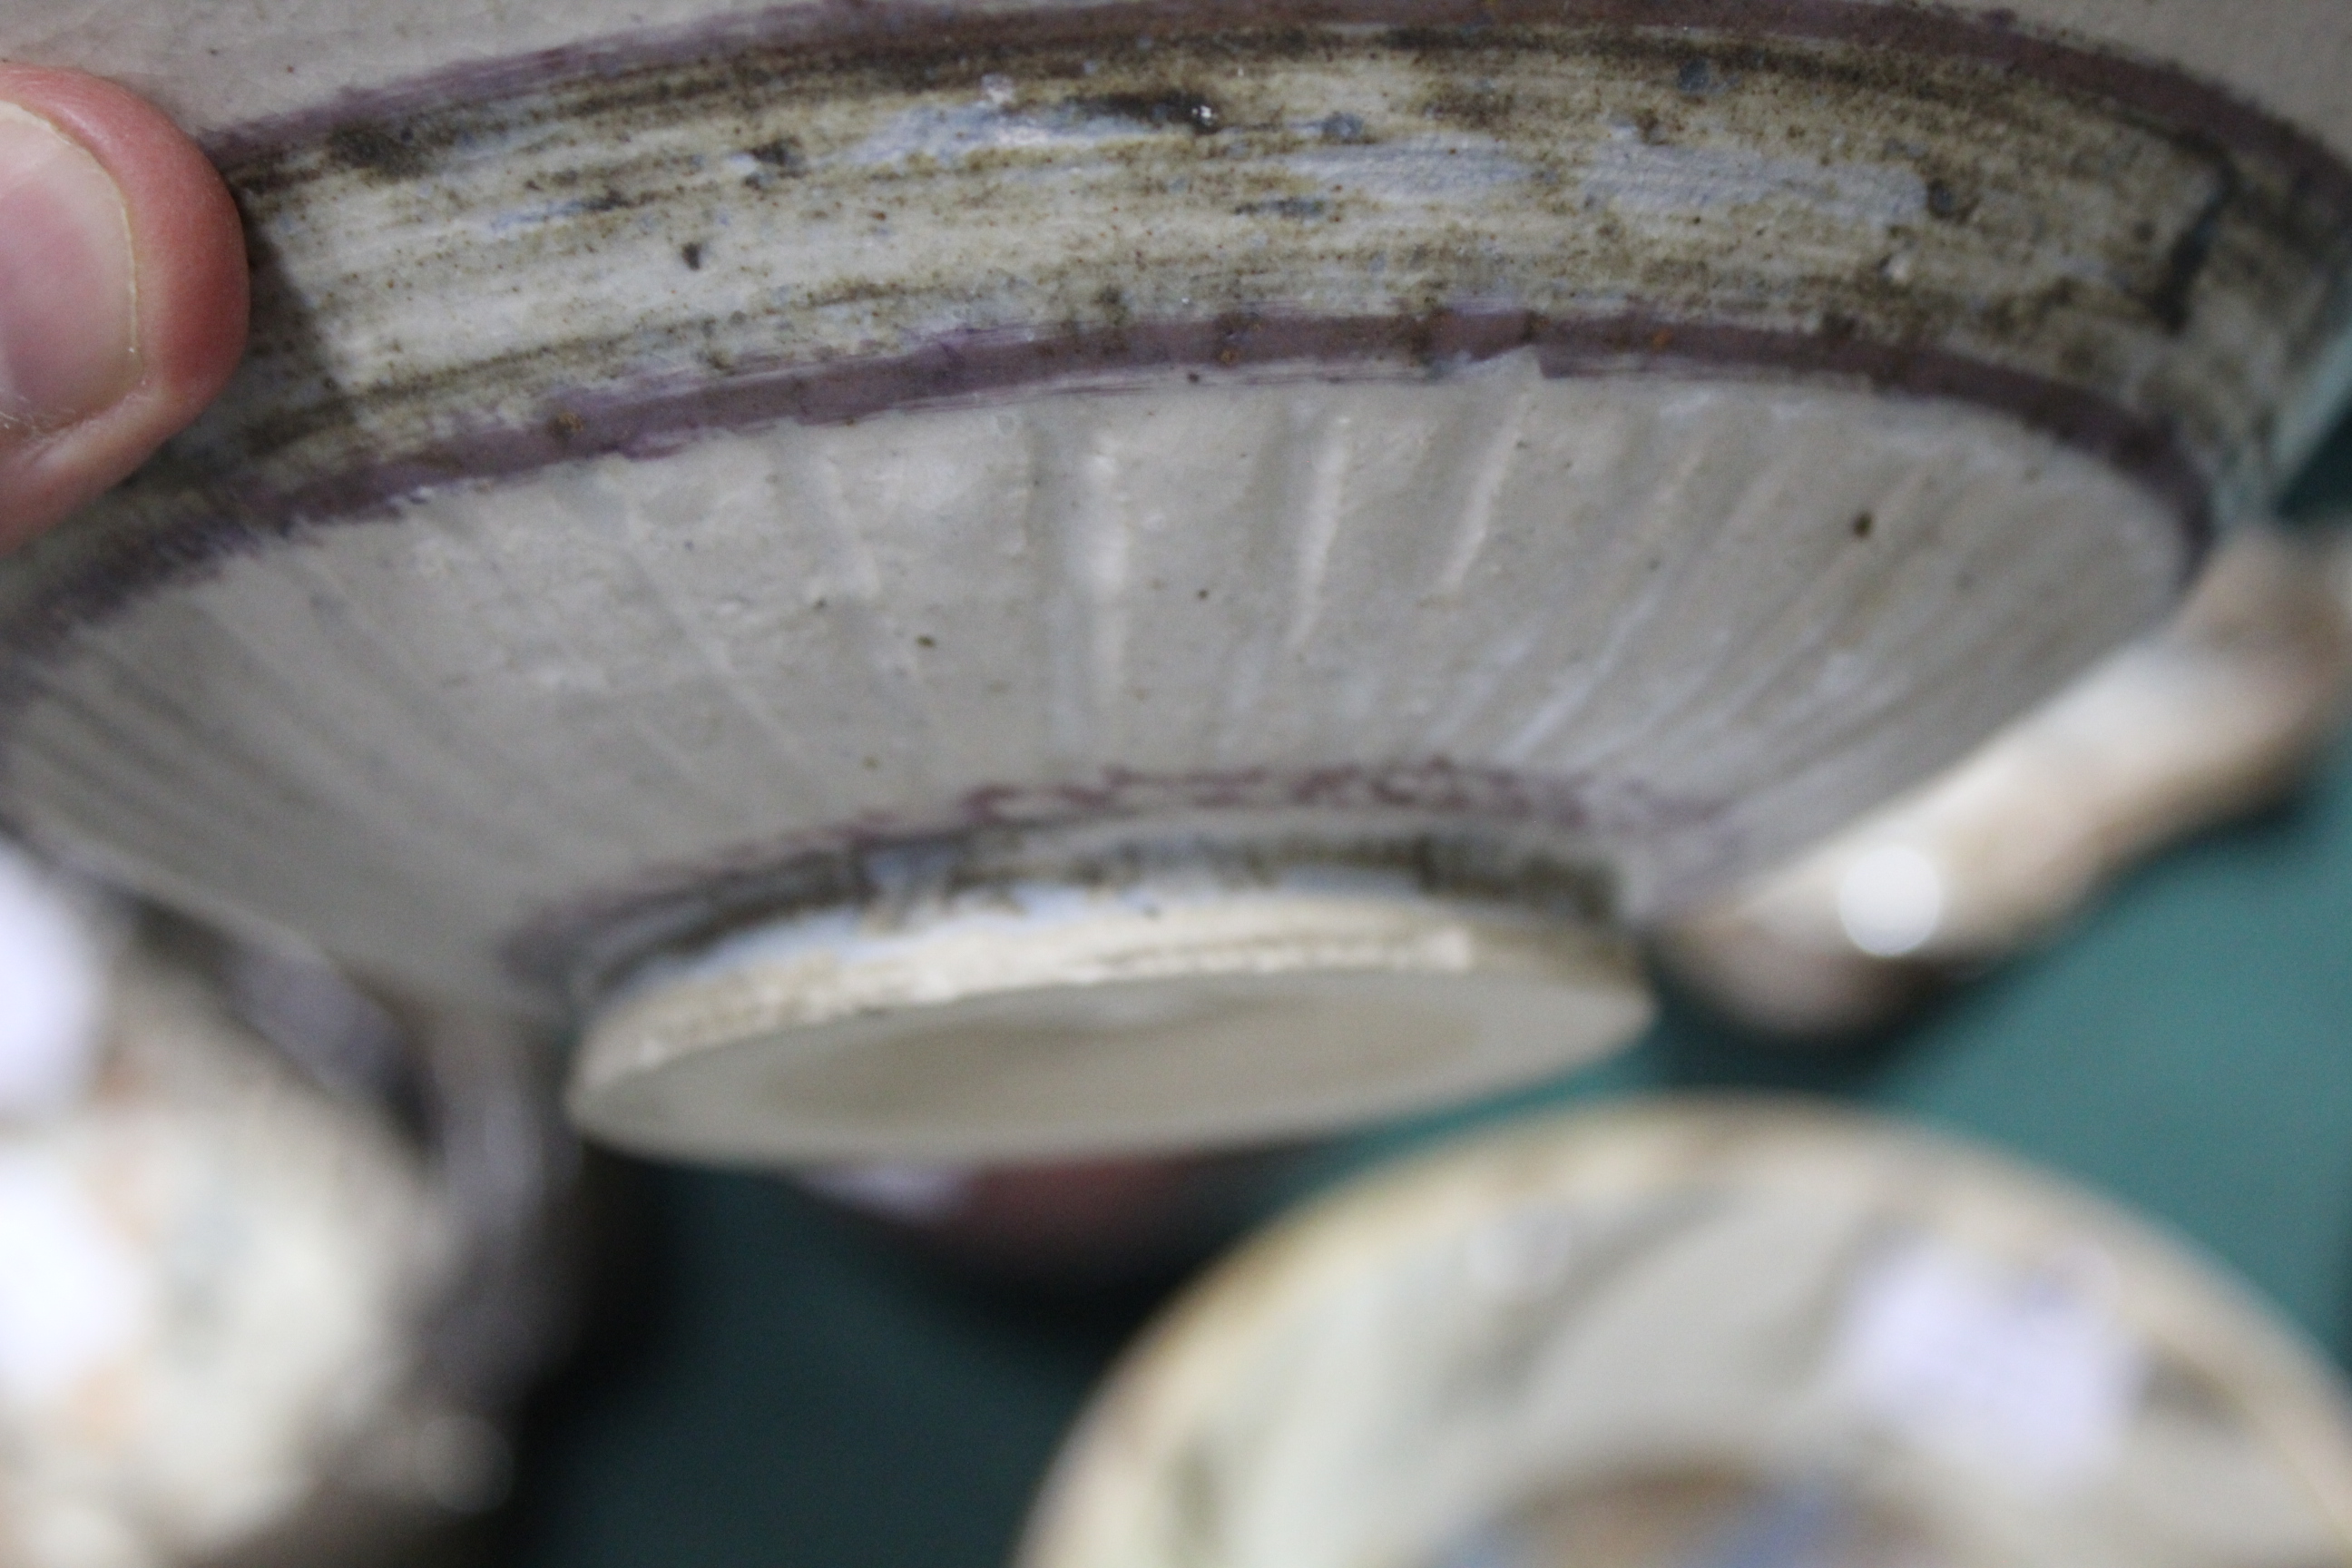 STUDIO POTTERY including a porcelain bowl by Maureen Shearlaw, with a pink and green glazed interior - Image 7 of 13